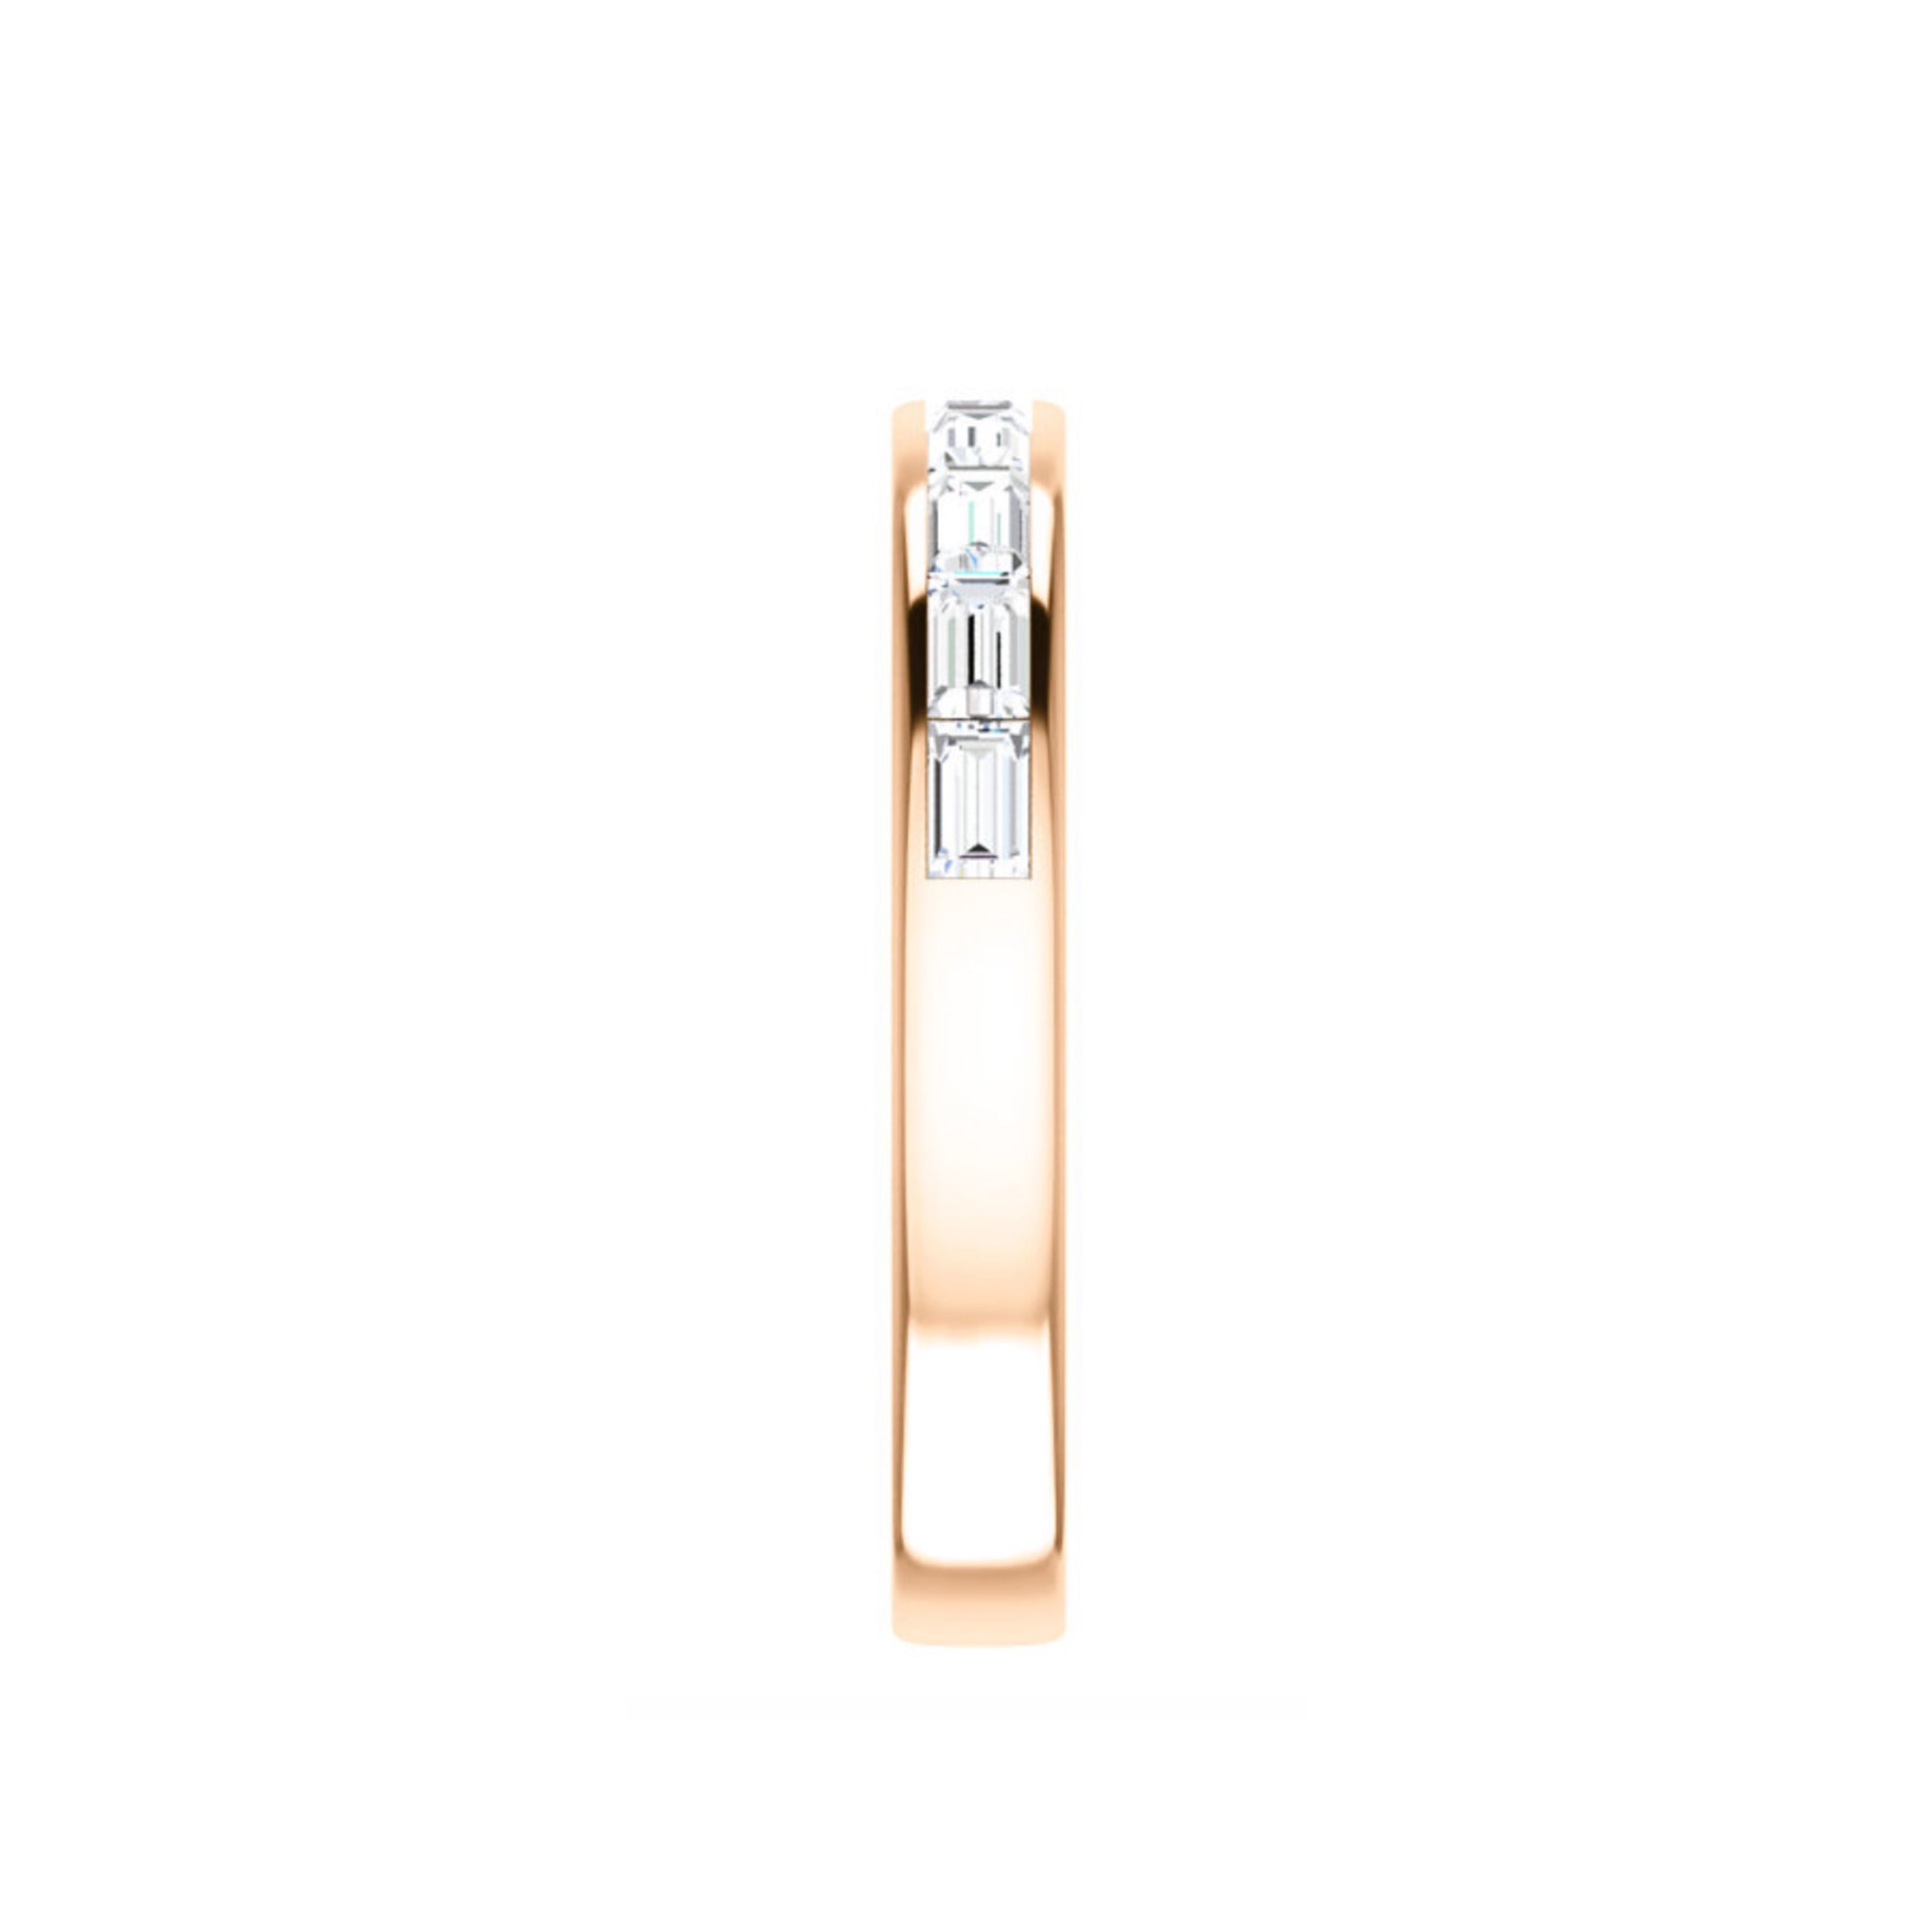 Channel Set Diamond Baguette Stack Band in White, Yellow or Rose Gold - Talisman Collection Fine Jewelers